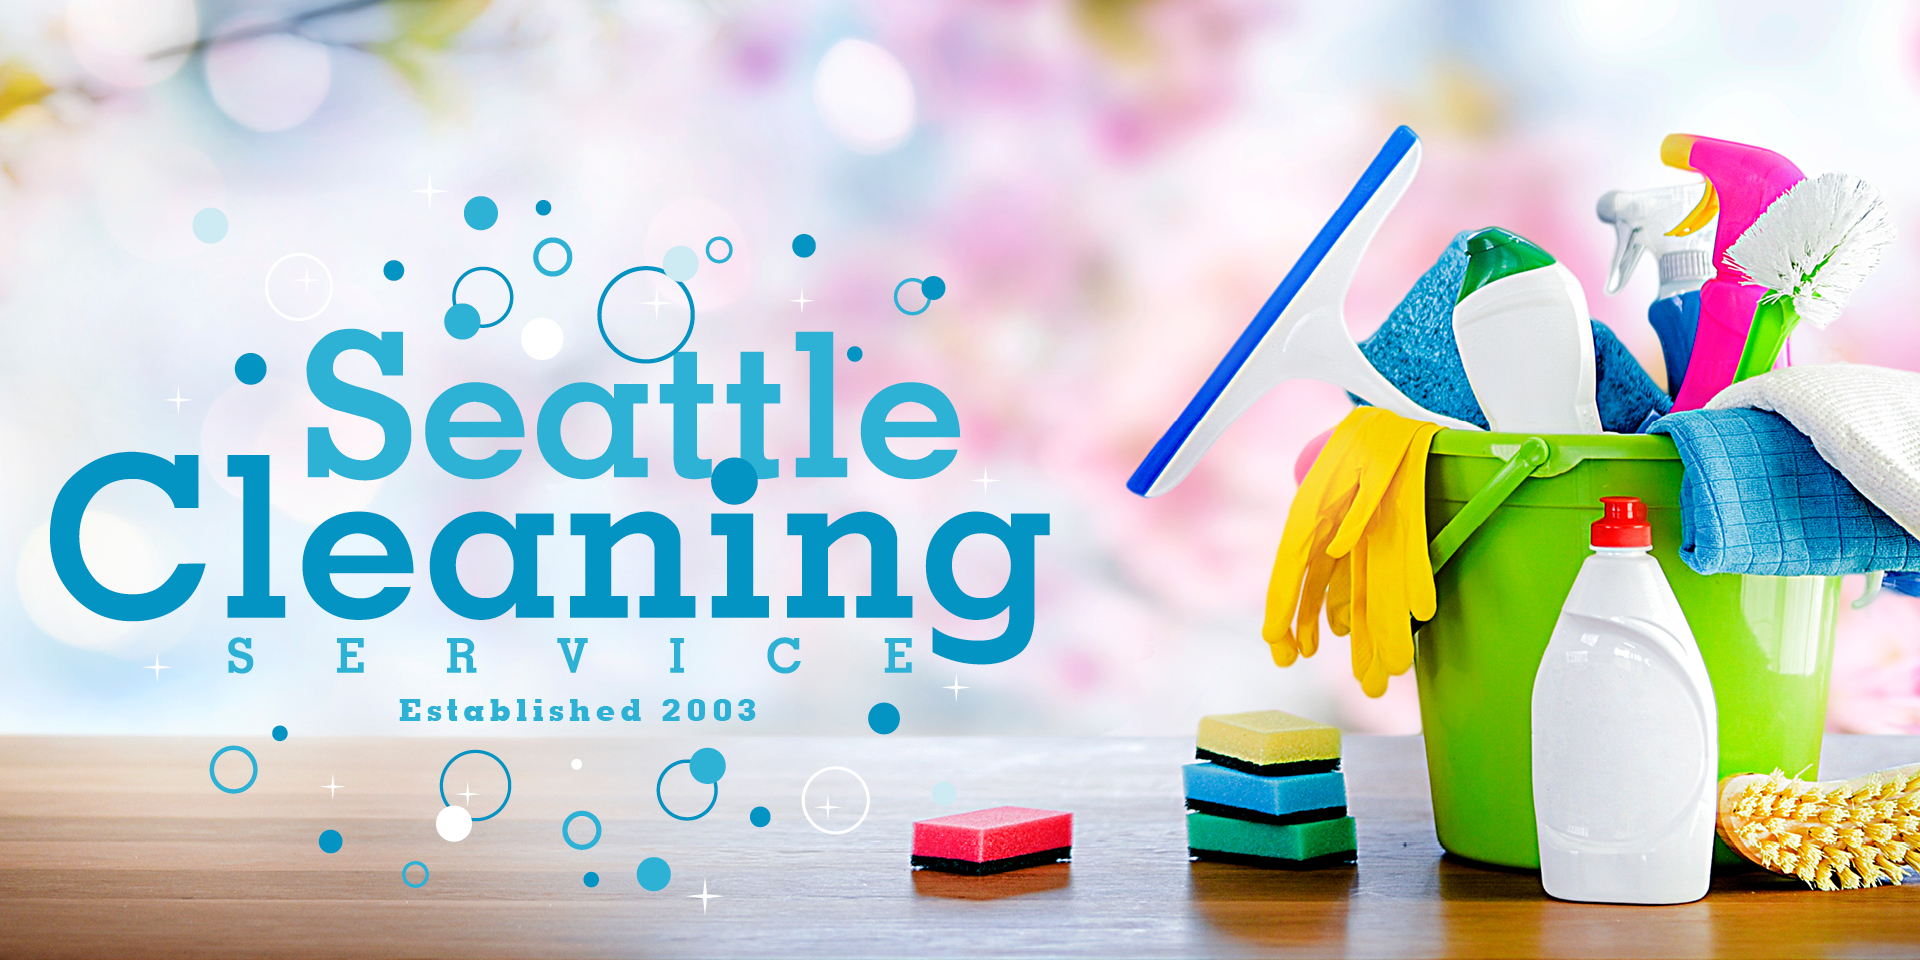 Seattle Cleaning Service